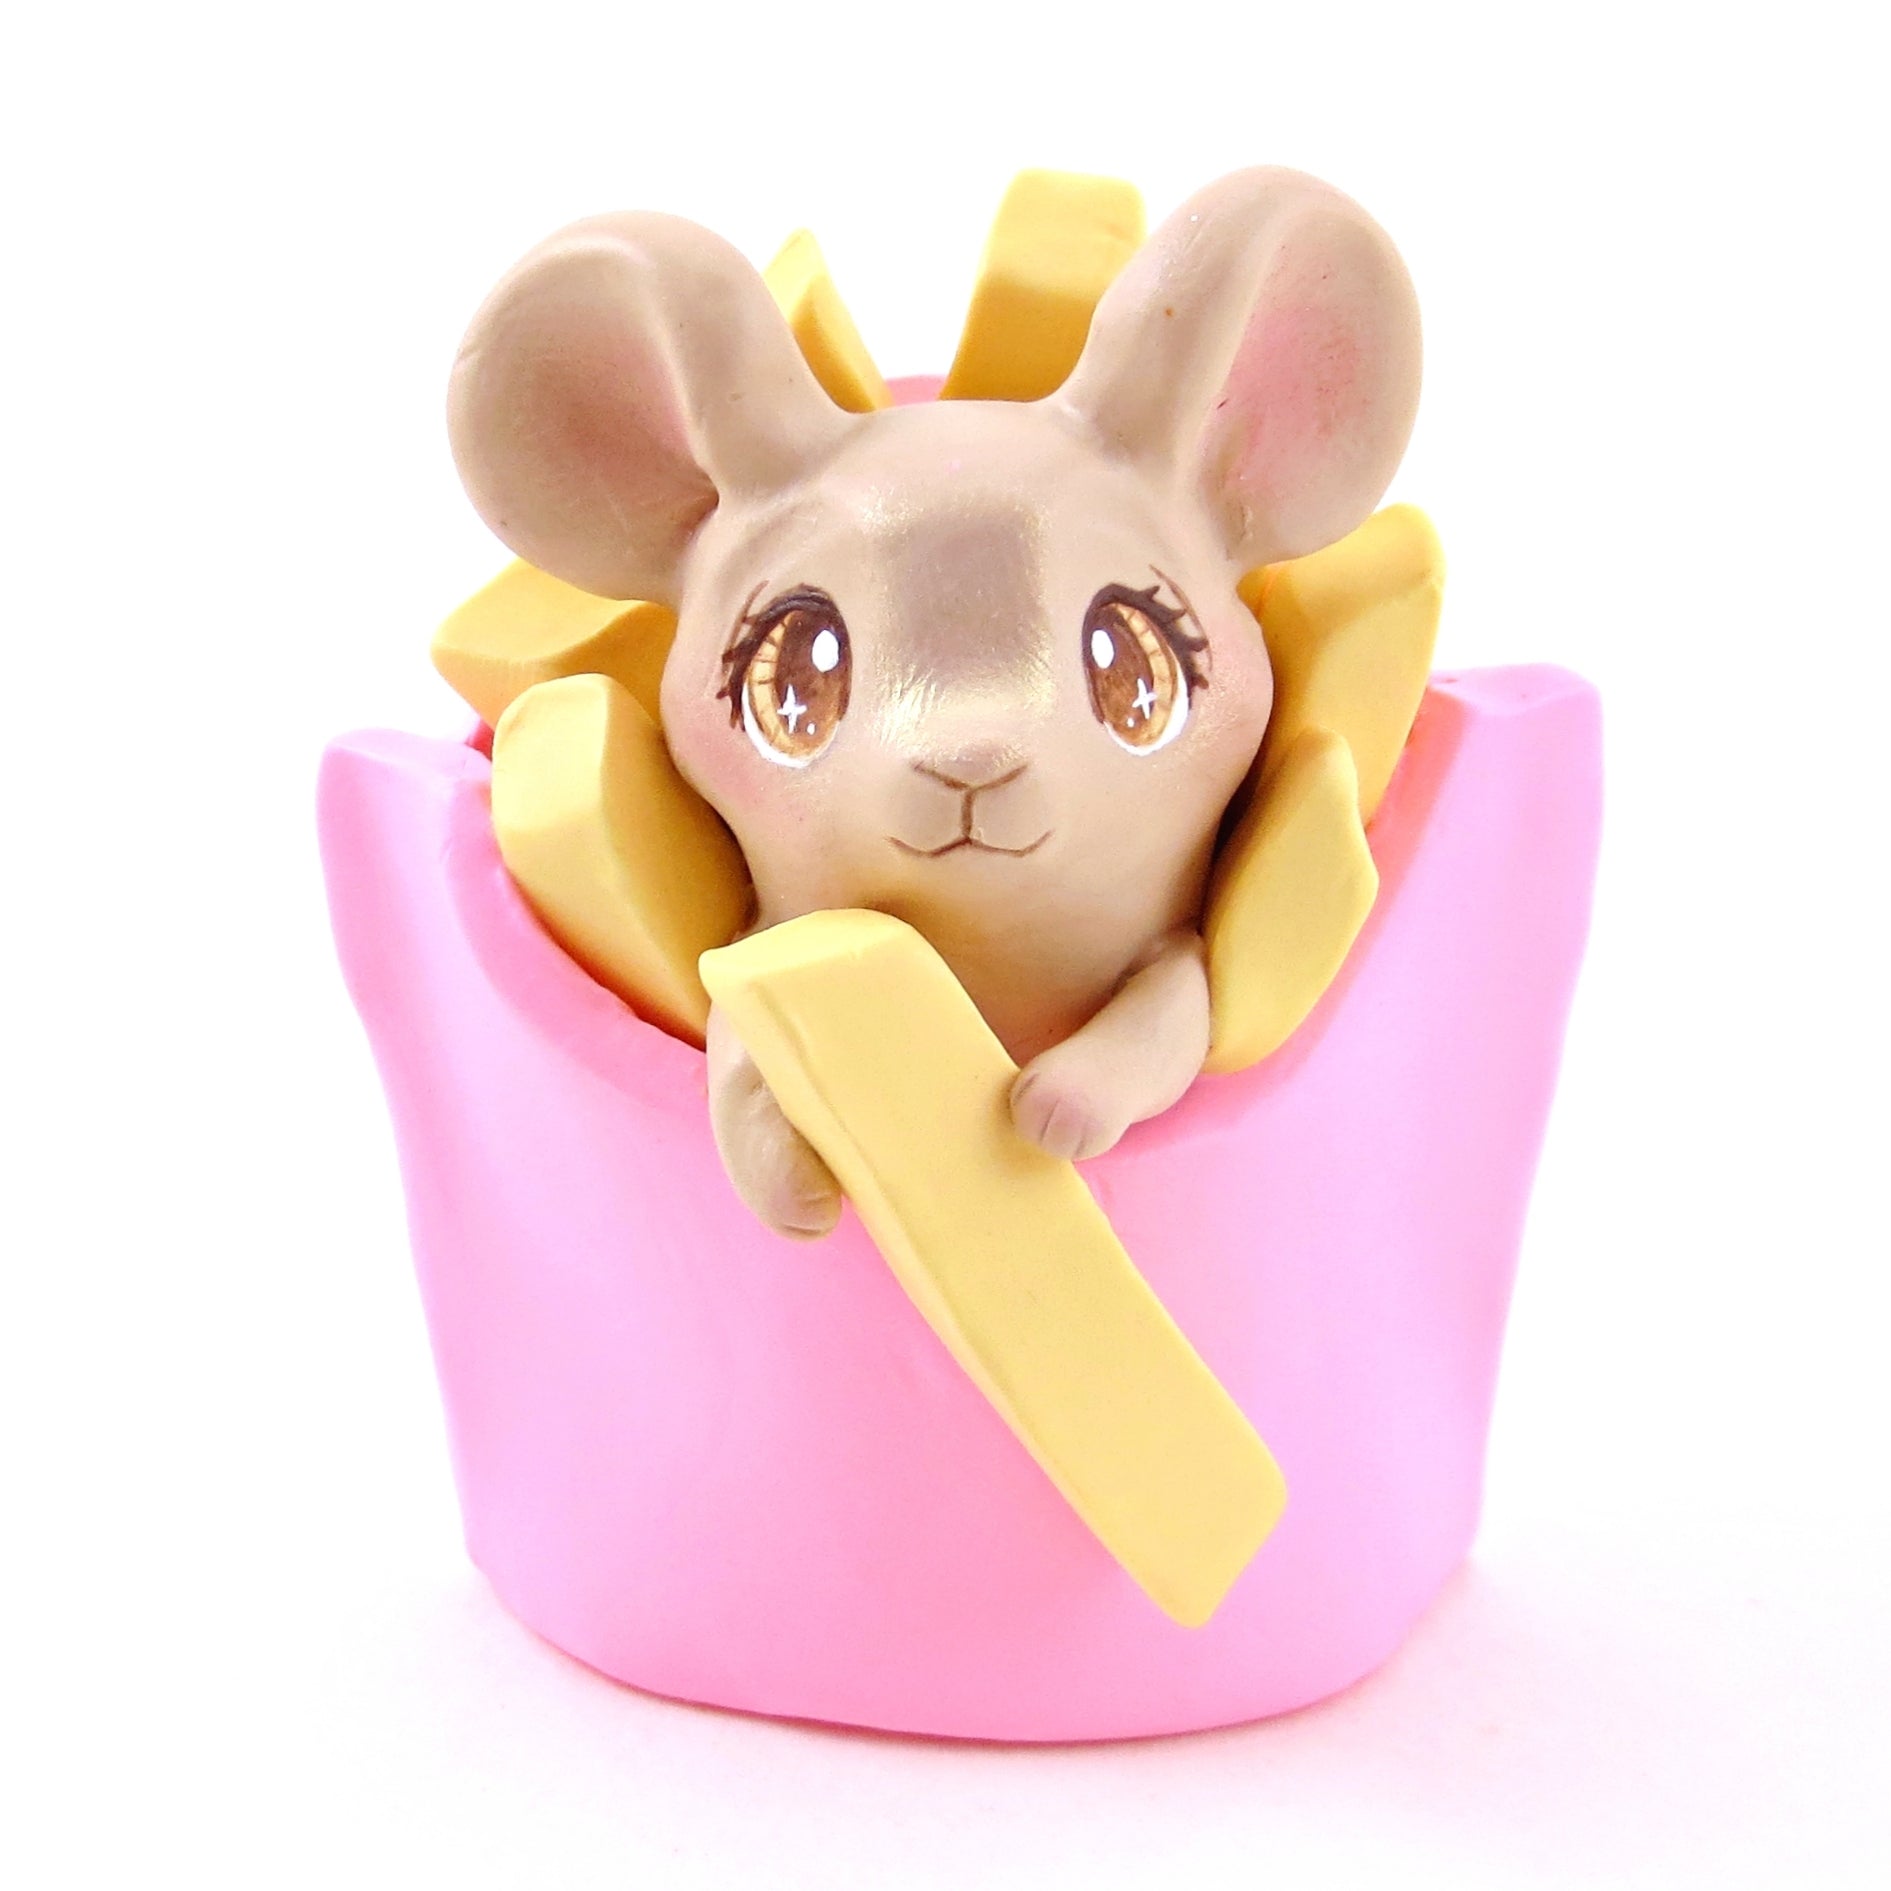 French Fry Mouse Figurine - Polymer Clay Animals Carnival/Circus Collection